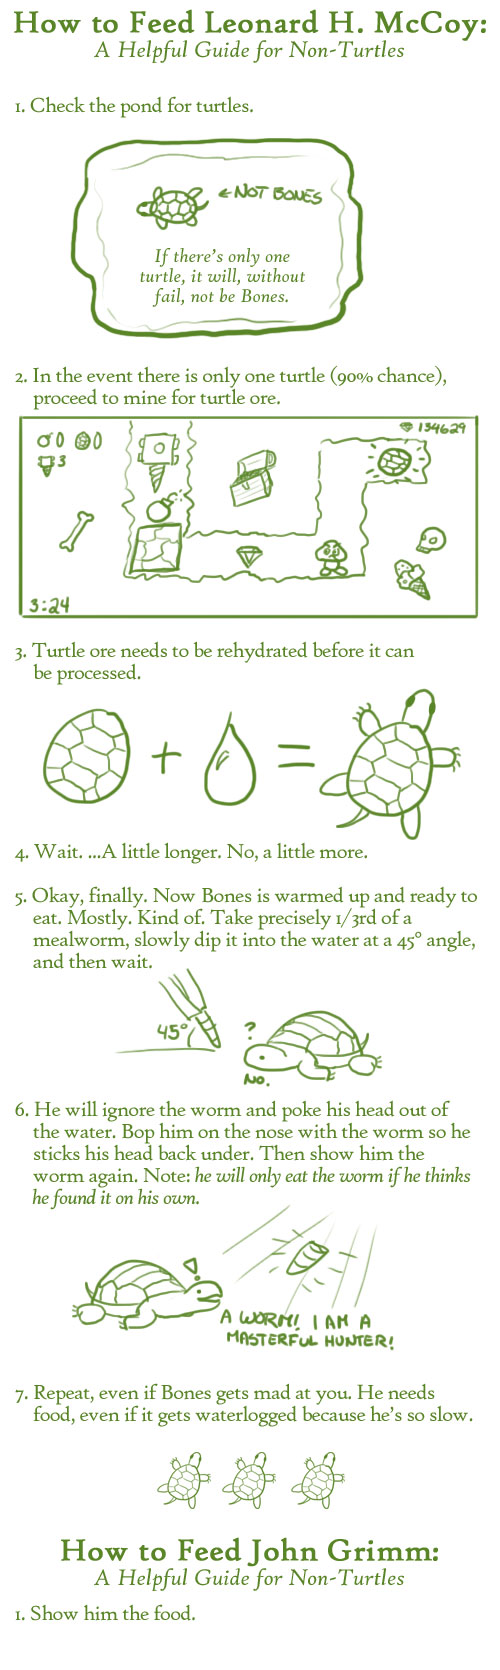 How to Feed Leonard H. McCoy: A Guide for Non-Turtles